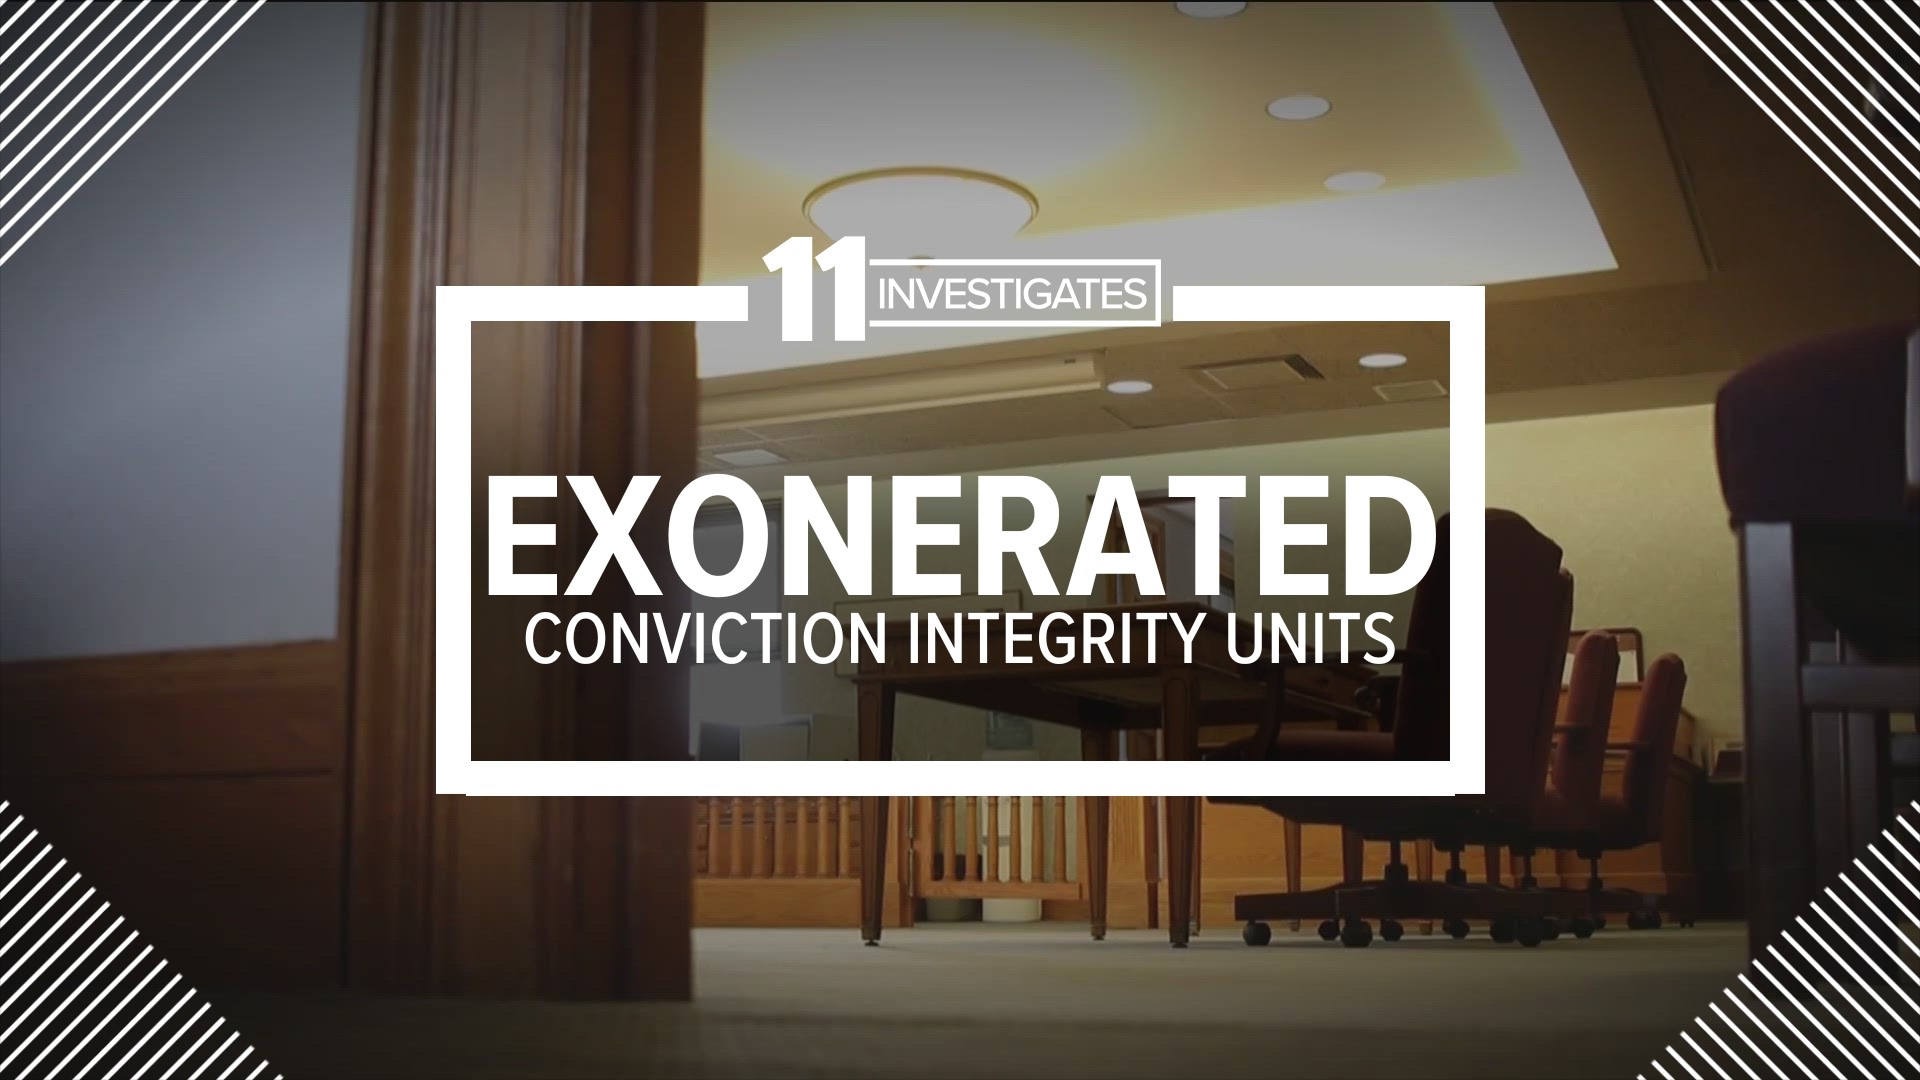 False confessions, confirmation bias, mistaken eyewitness identification and jailhouse informants are just some issues a conviction integrity unit has corrected.